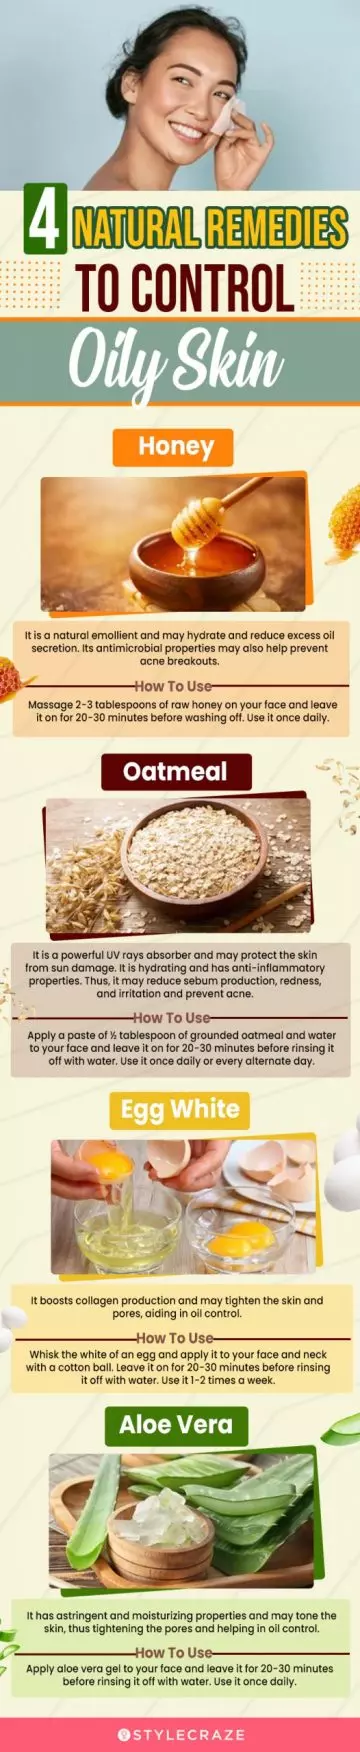 4 natural remedies to control oily skin(infographic)